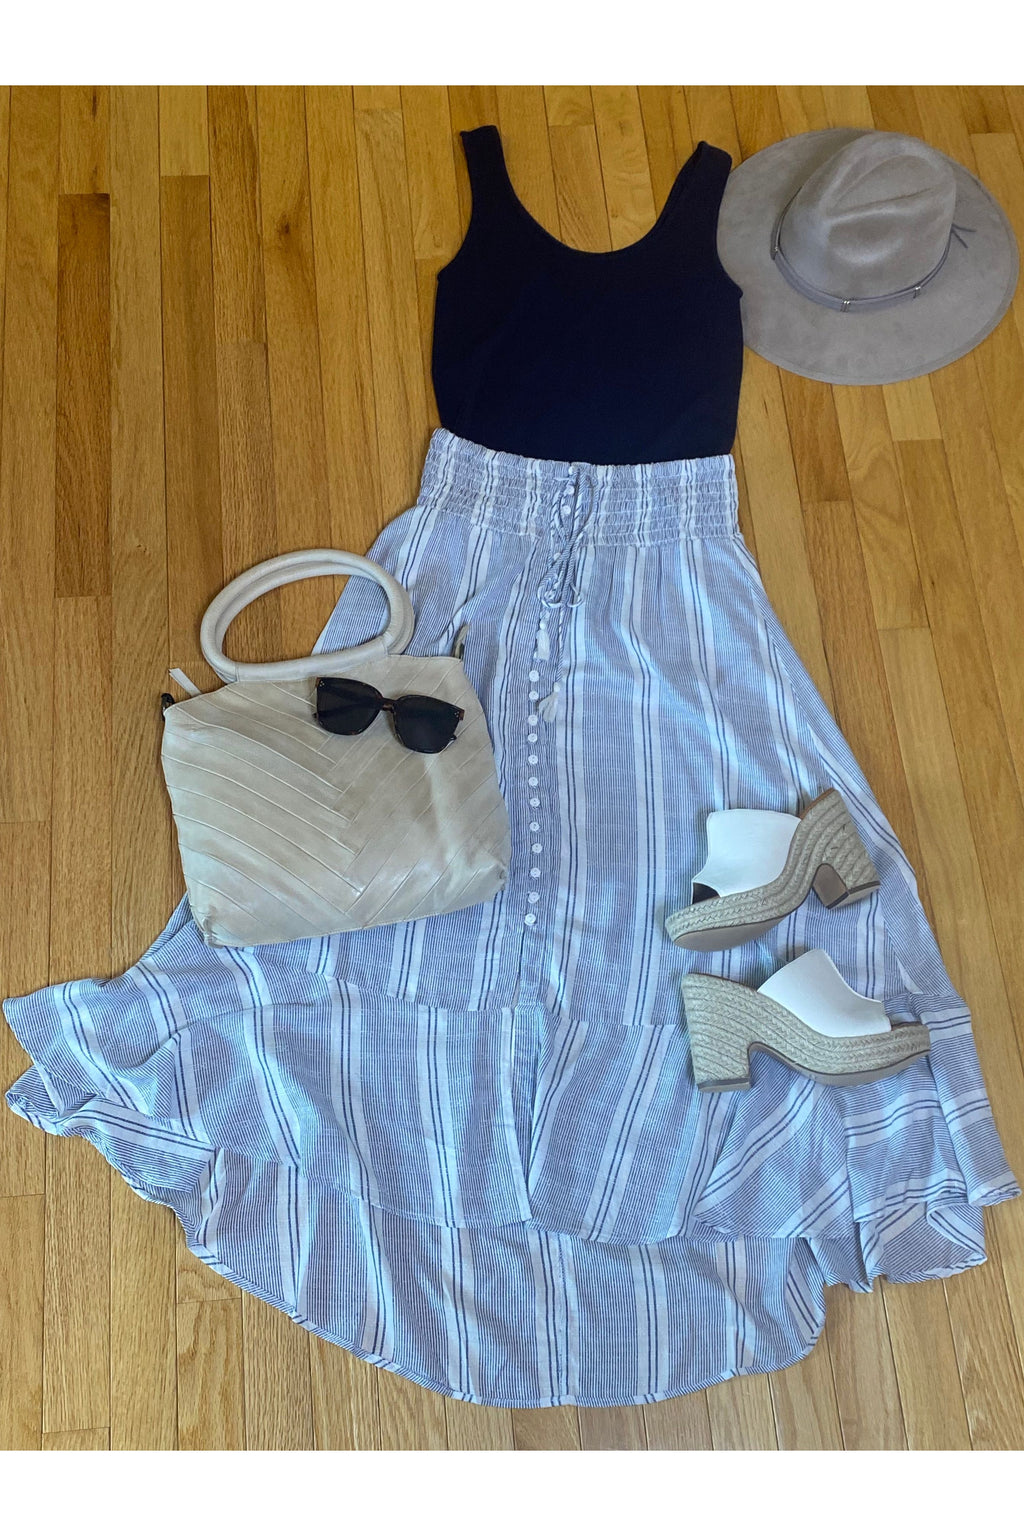 Keren Hart - Sriped A-line Maxi Skirt Faux Buttons Up the Front With Gathered Elastic High Waist Band - White/Blue